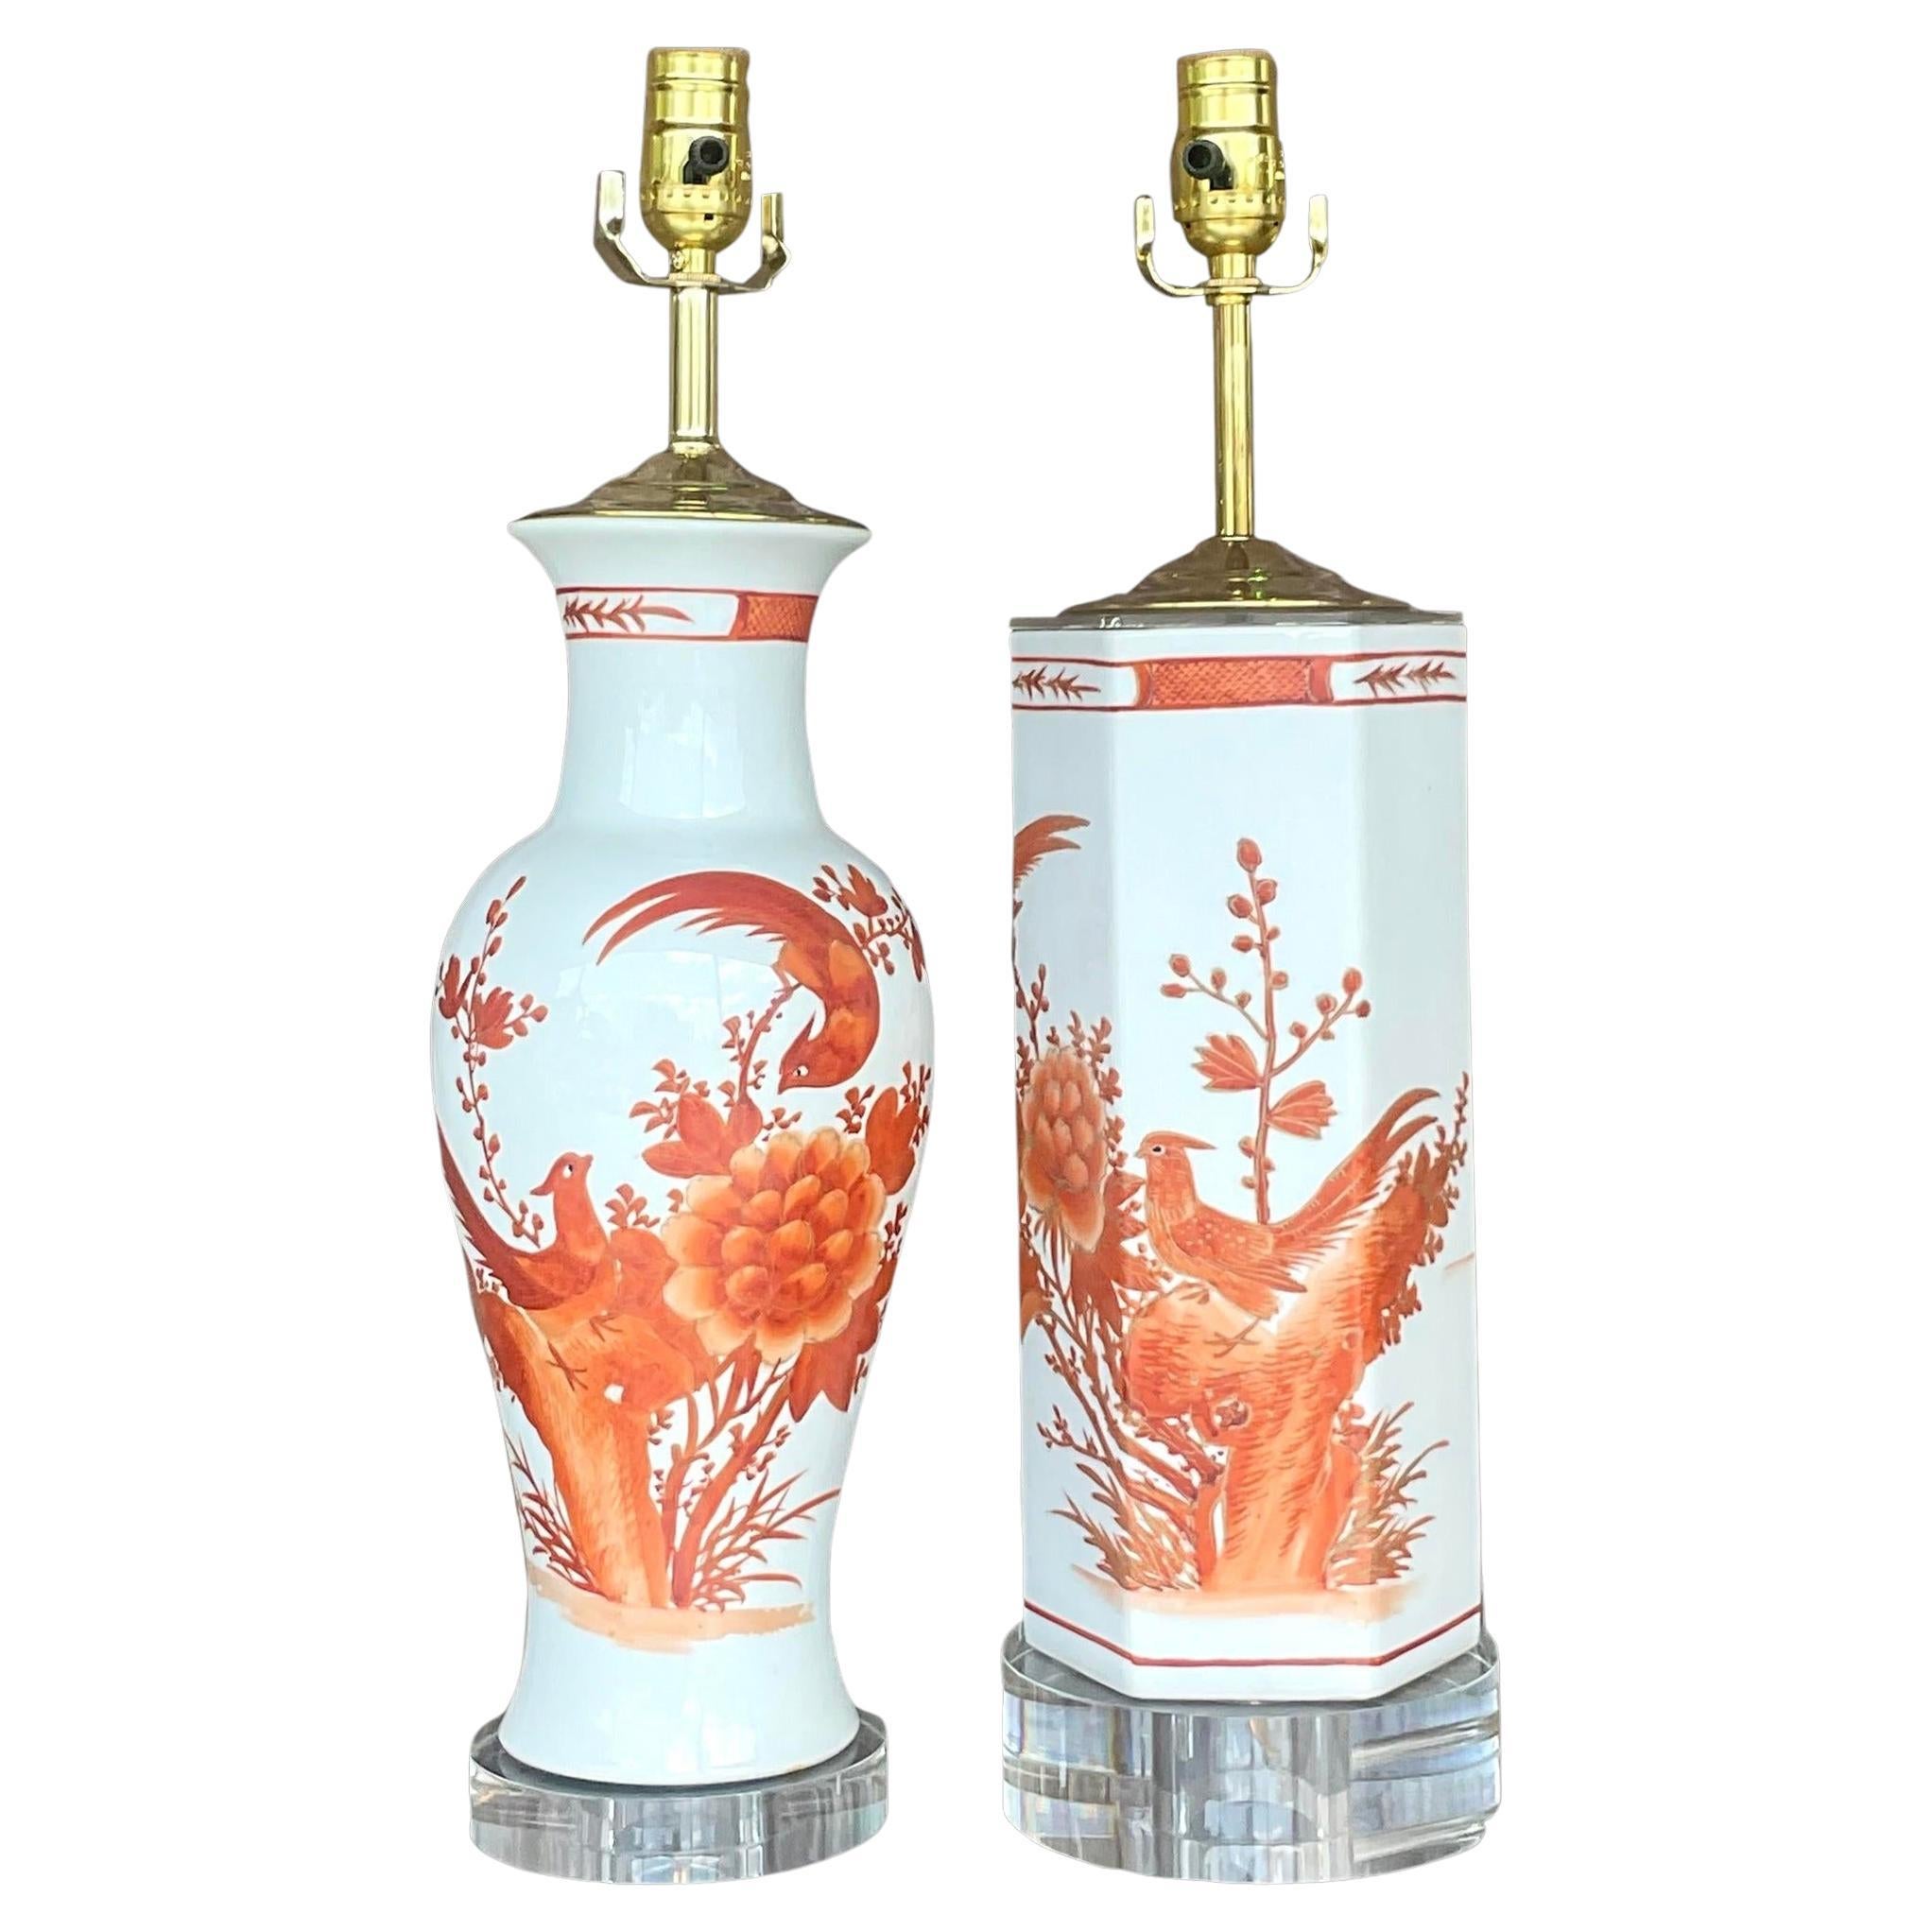 Vintage Regency Chinoiserie Lamps - Set of Two For Sale